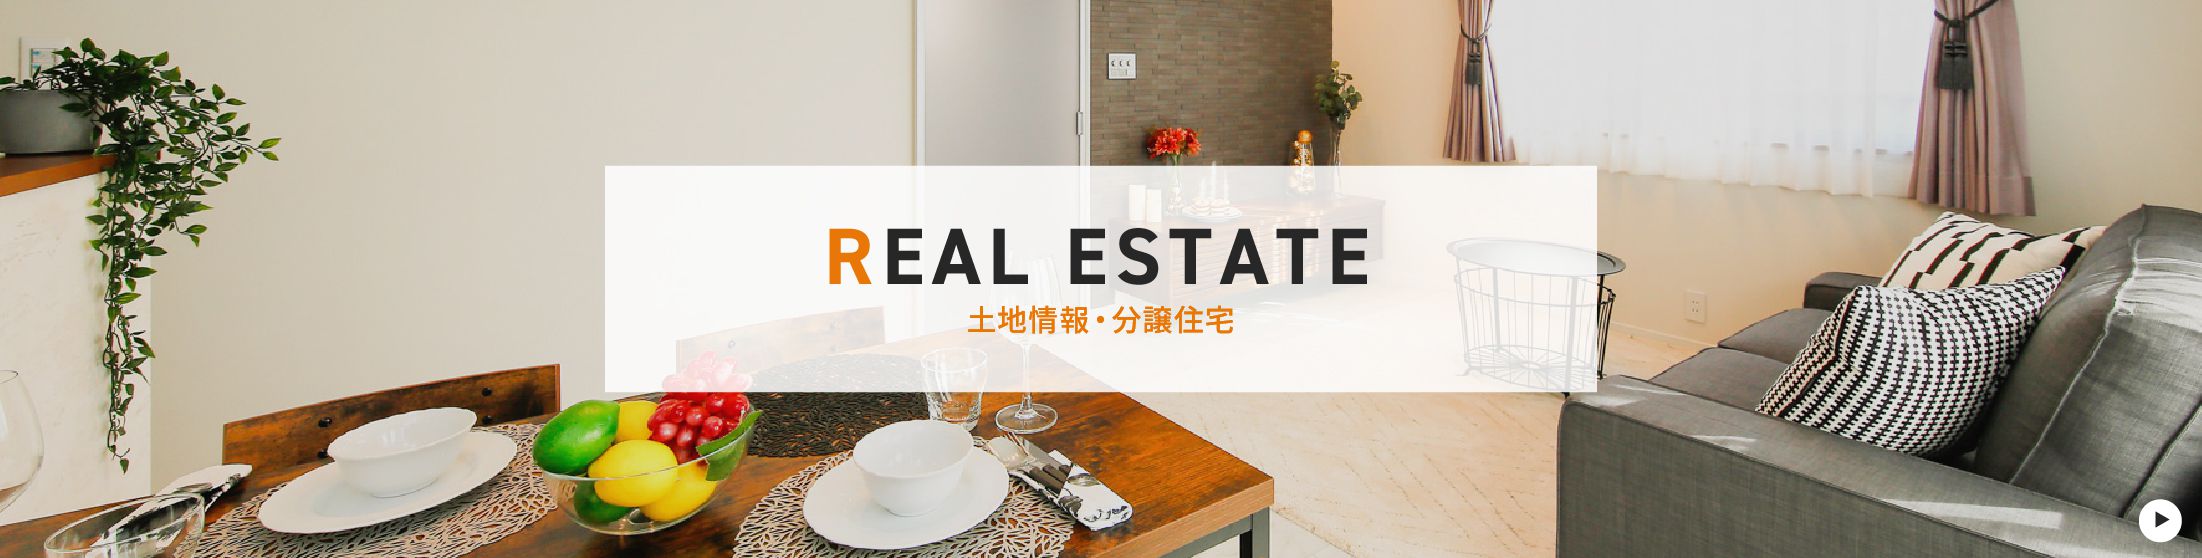 REAL ESTATE 土地情報・分譲住宅